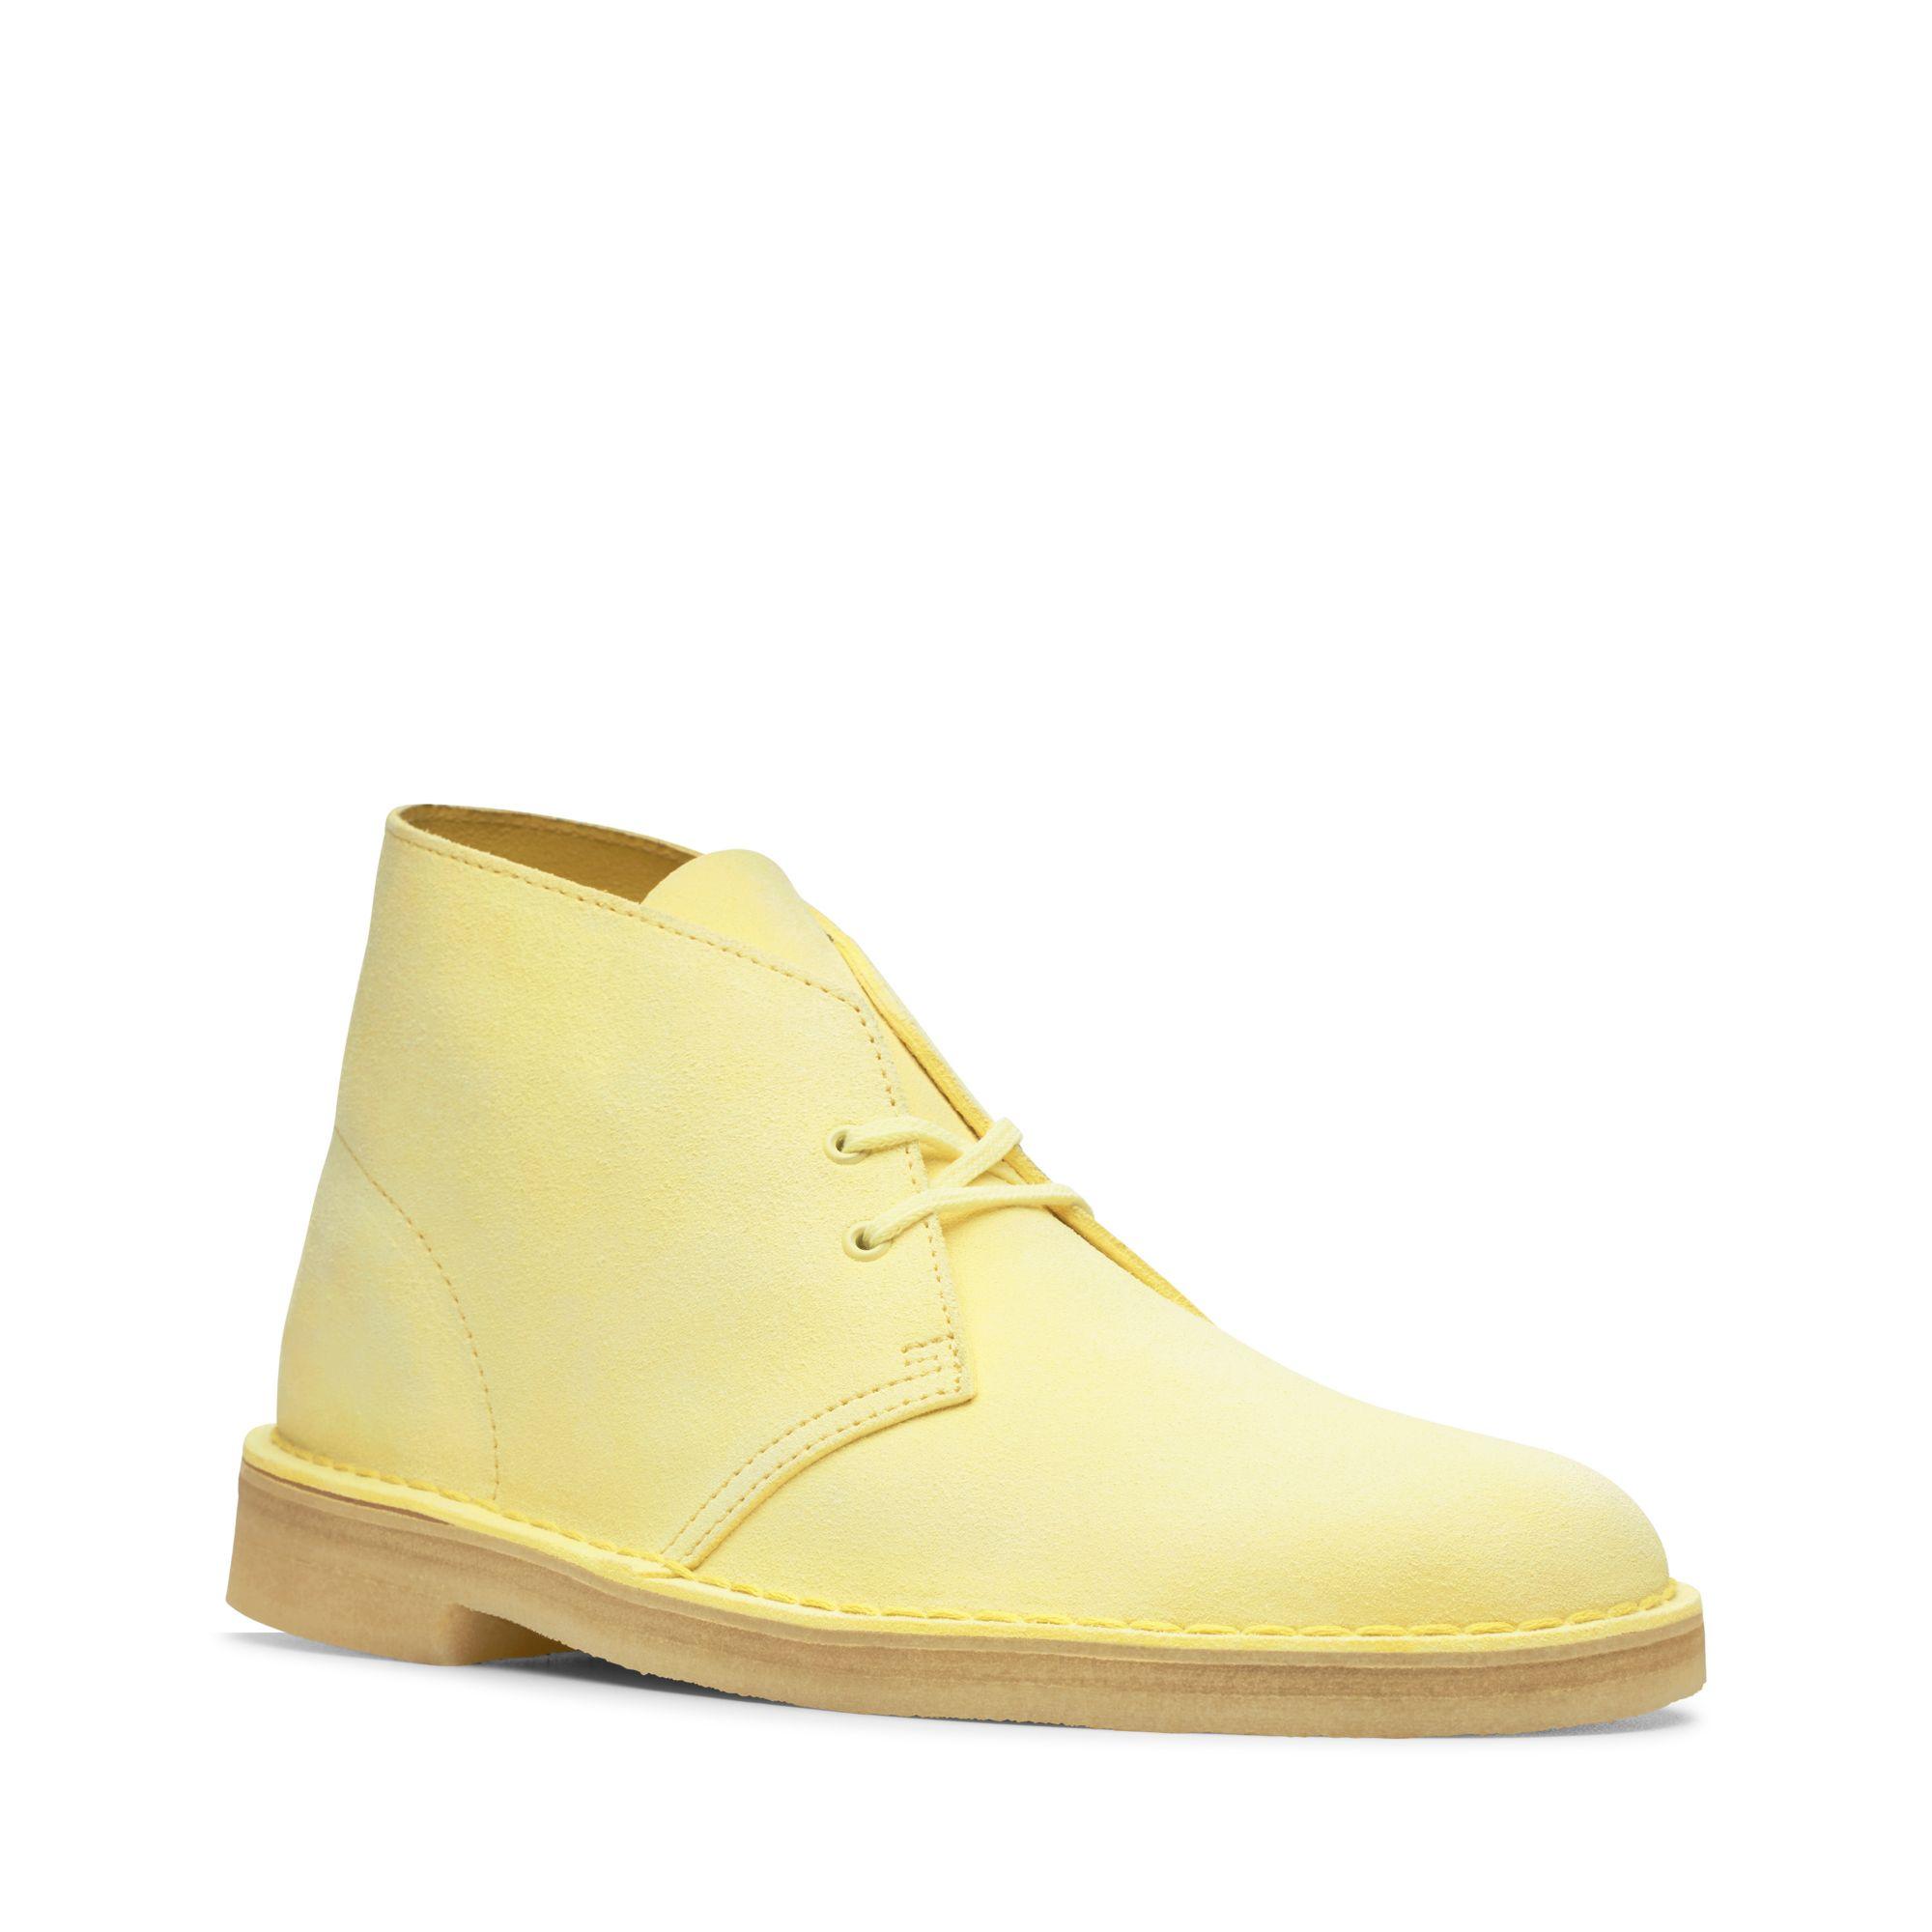 Clarks Suede Desert Boot in Pale Yellow 